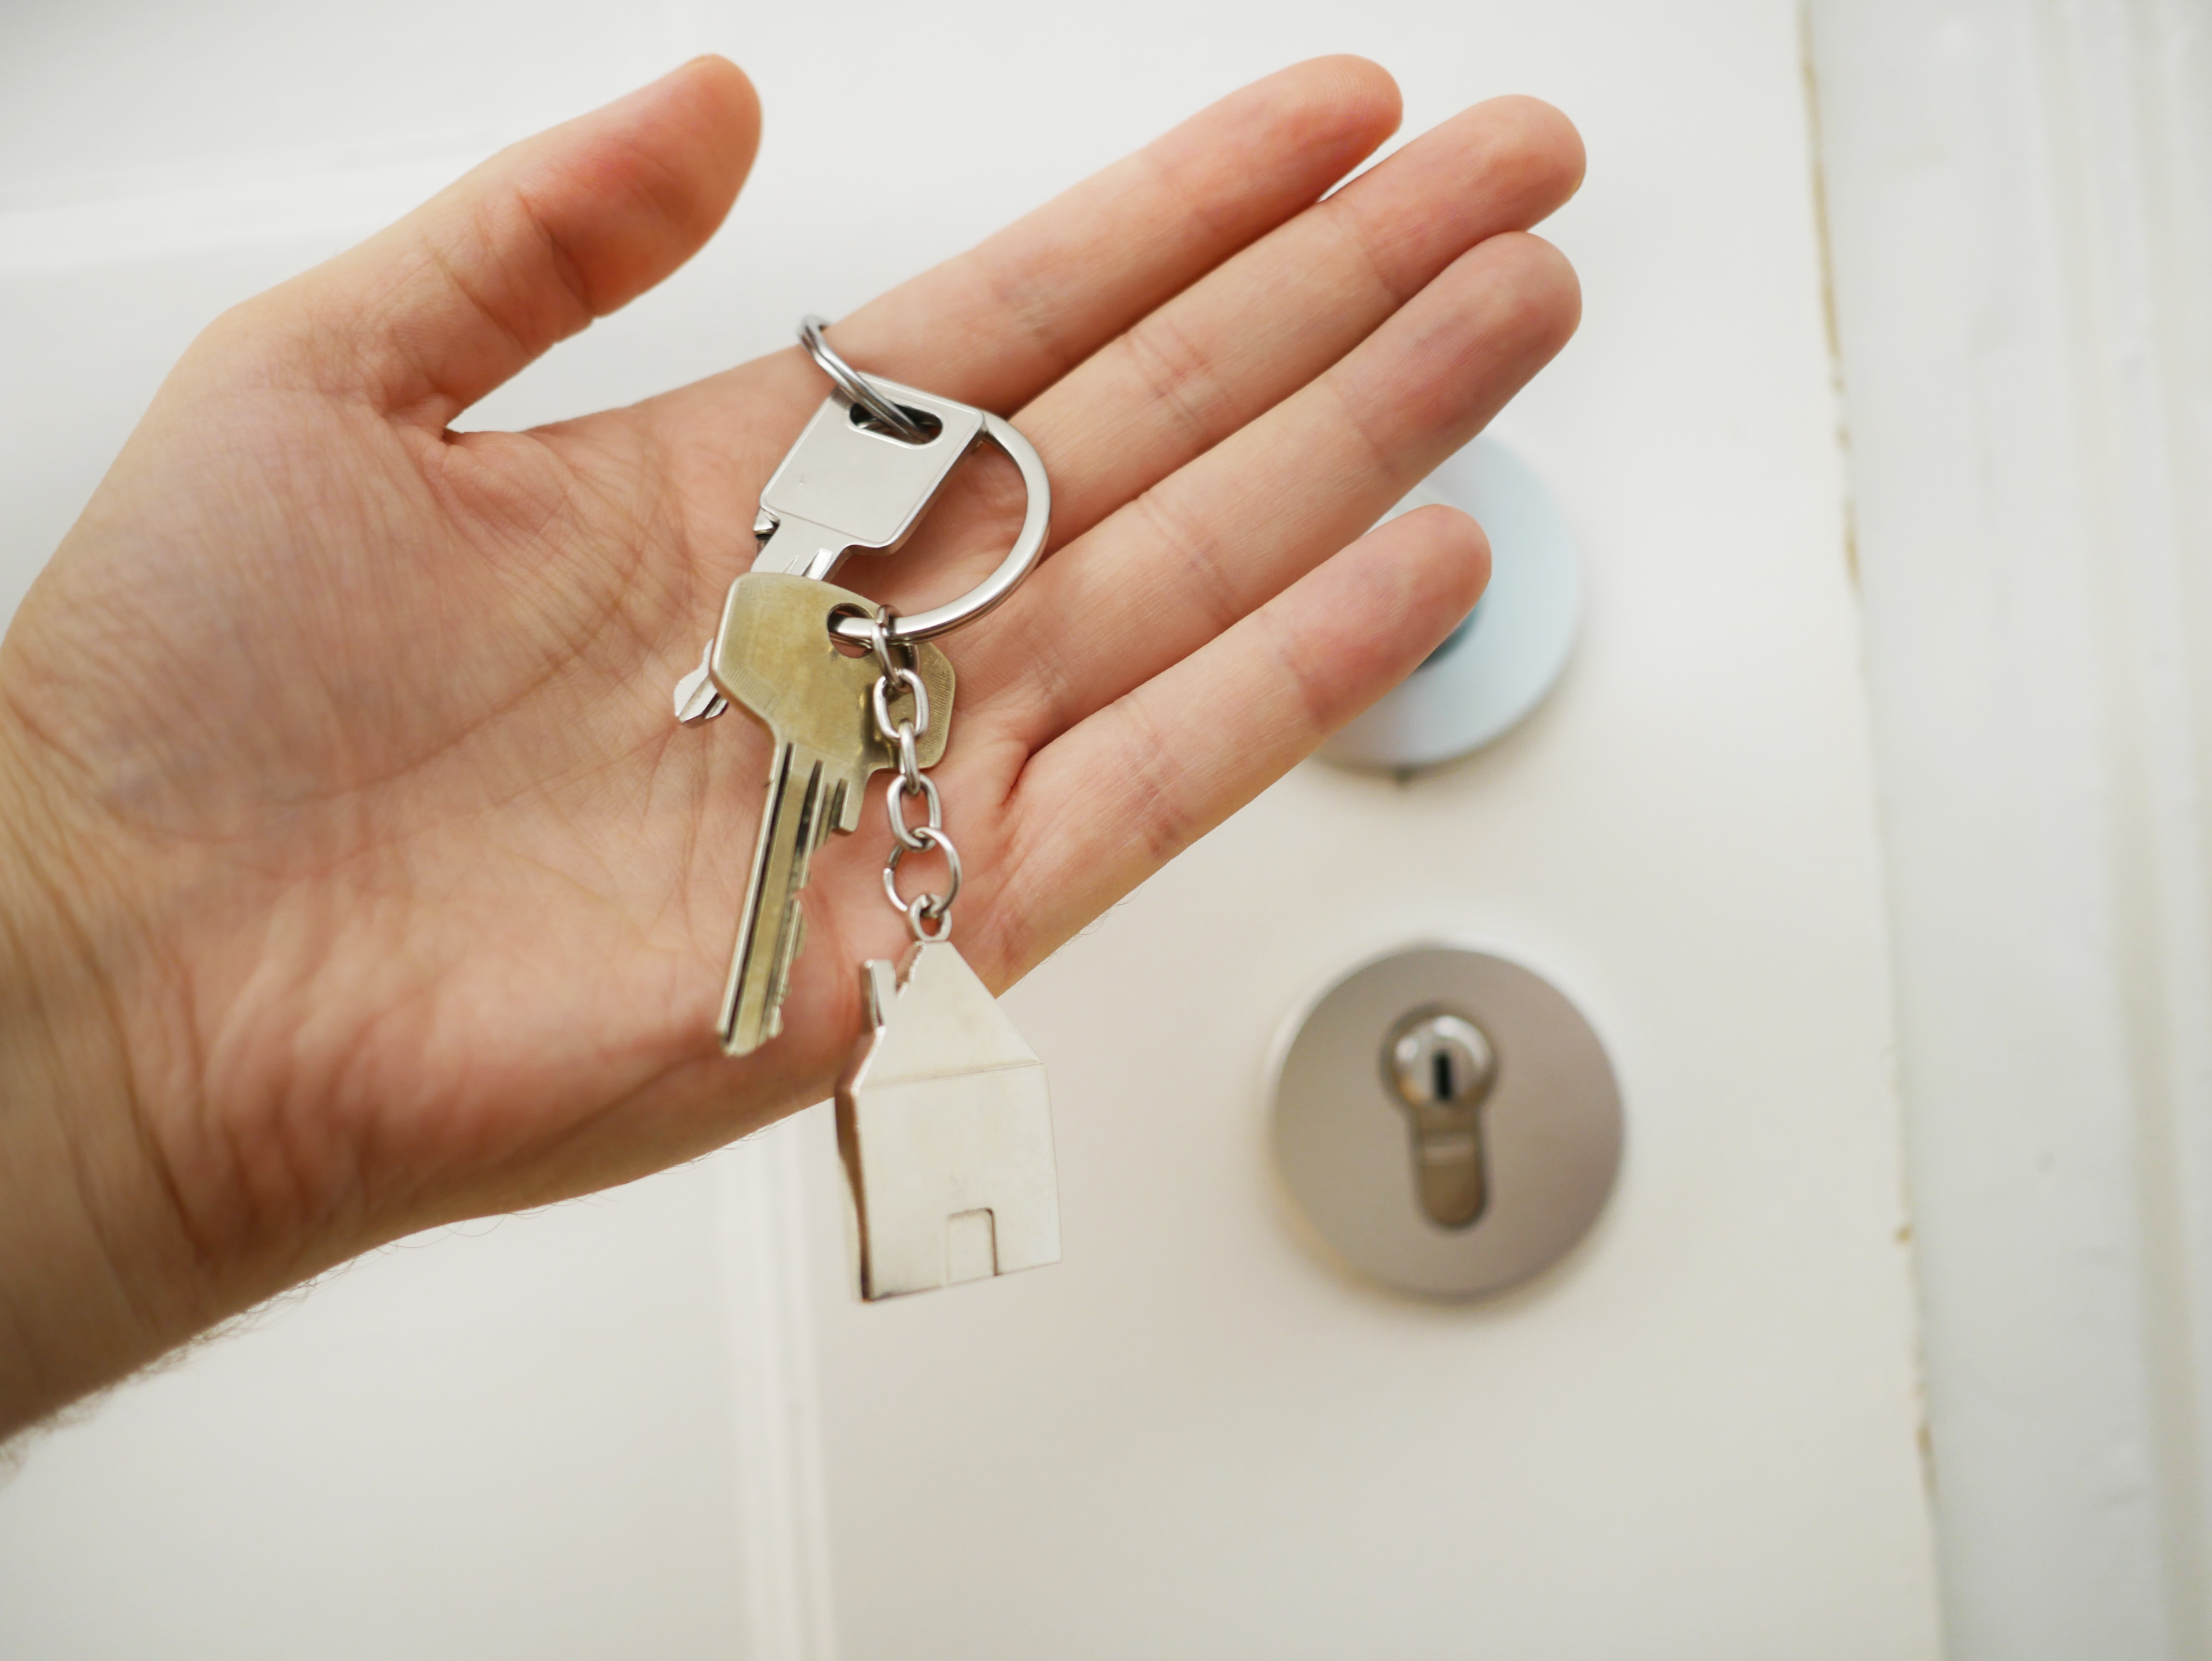 Keys to your new house in Spain